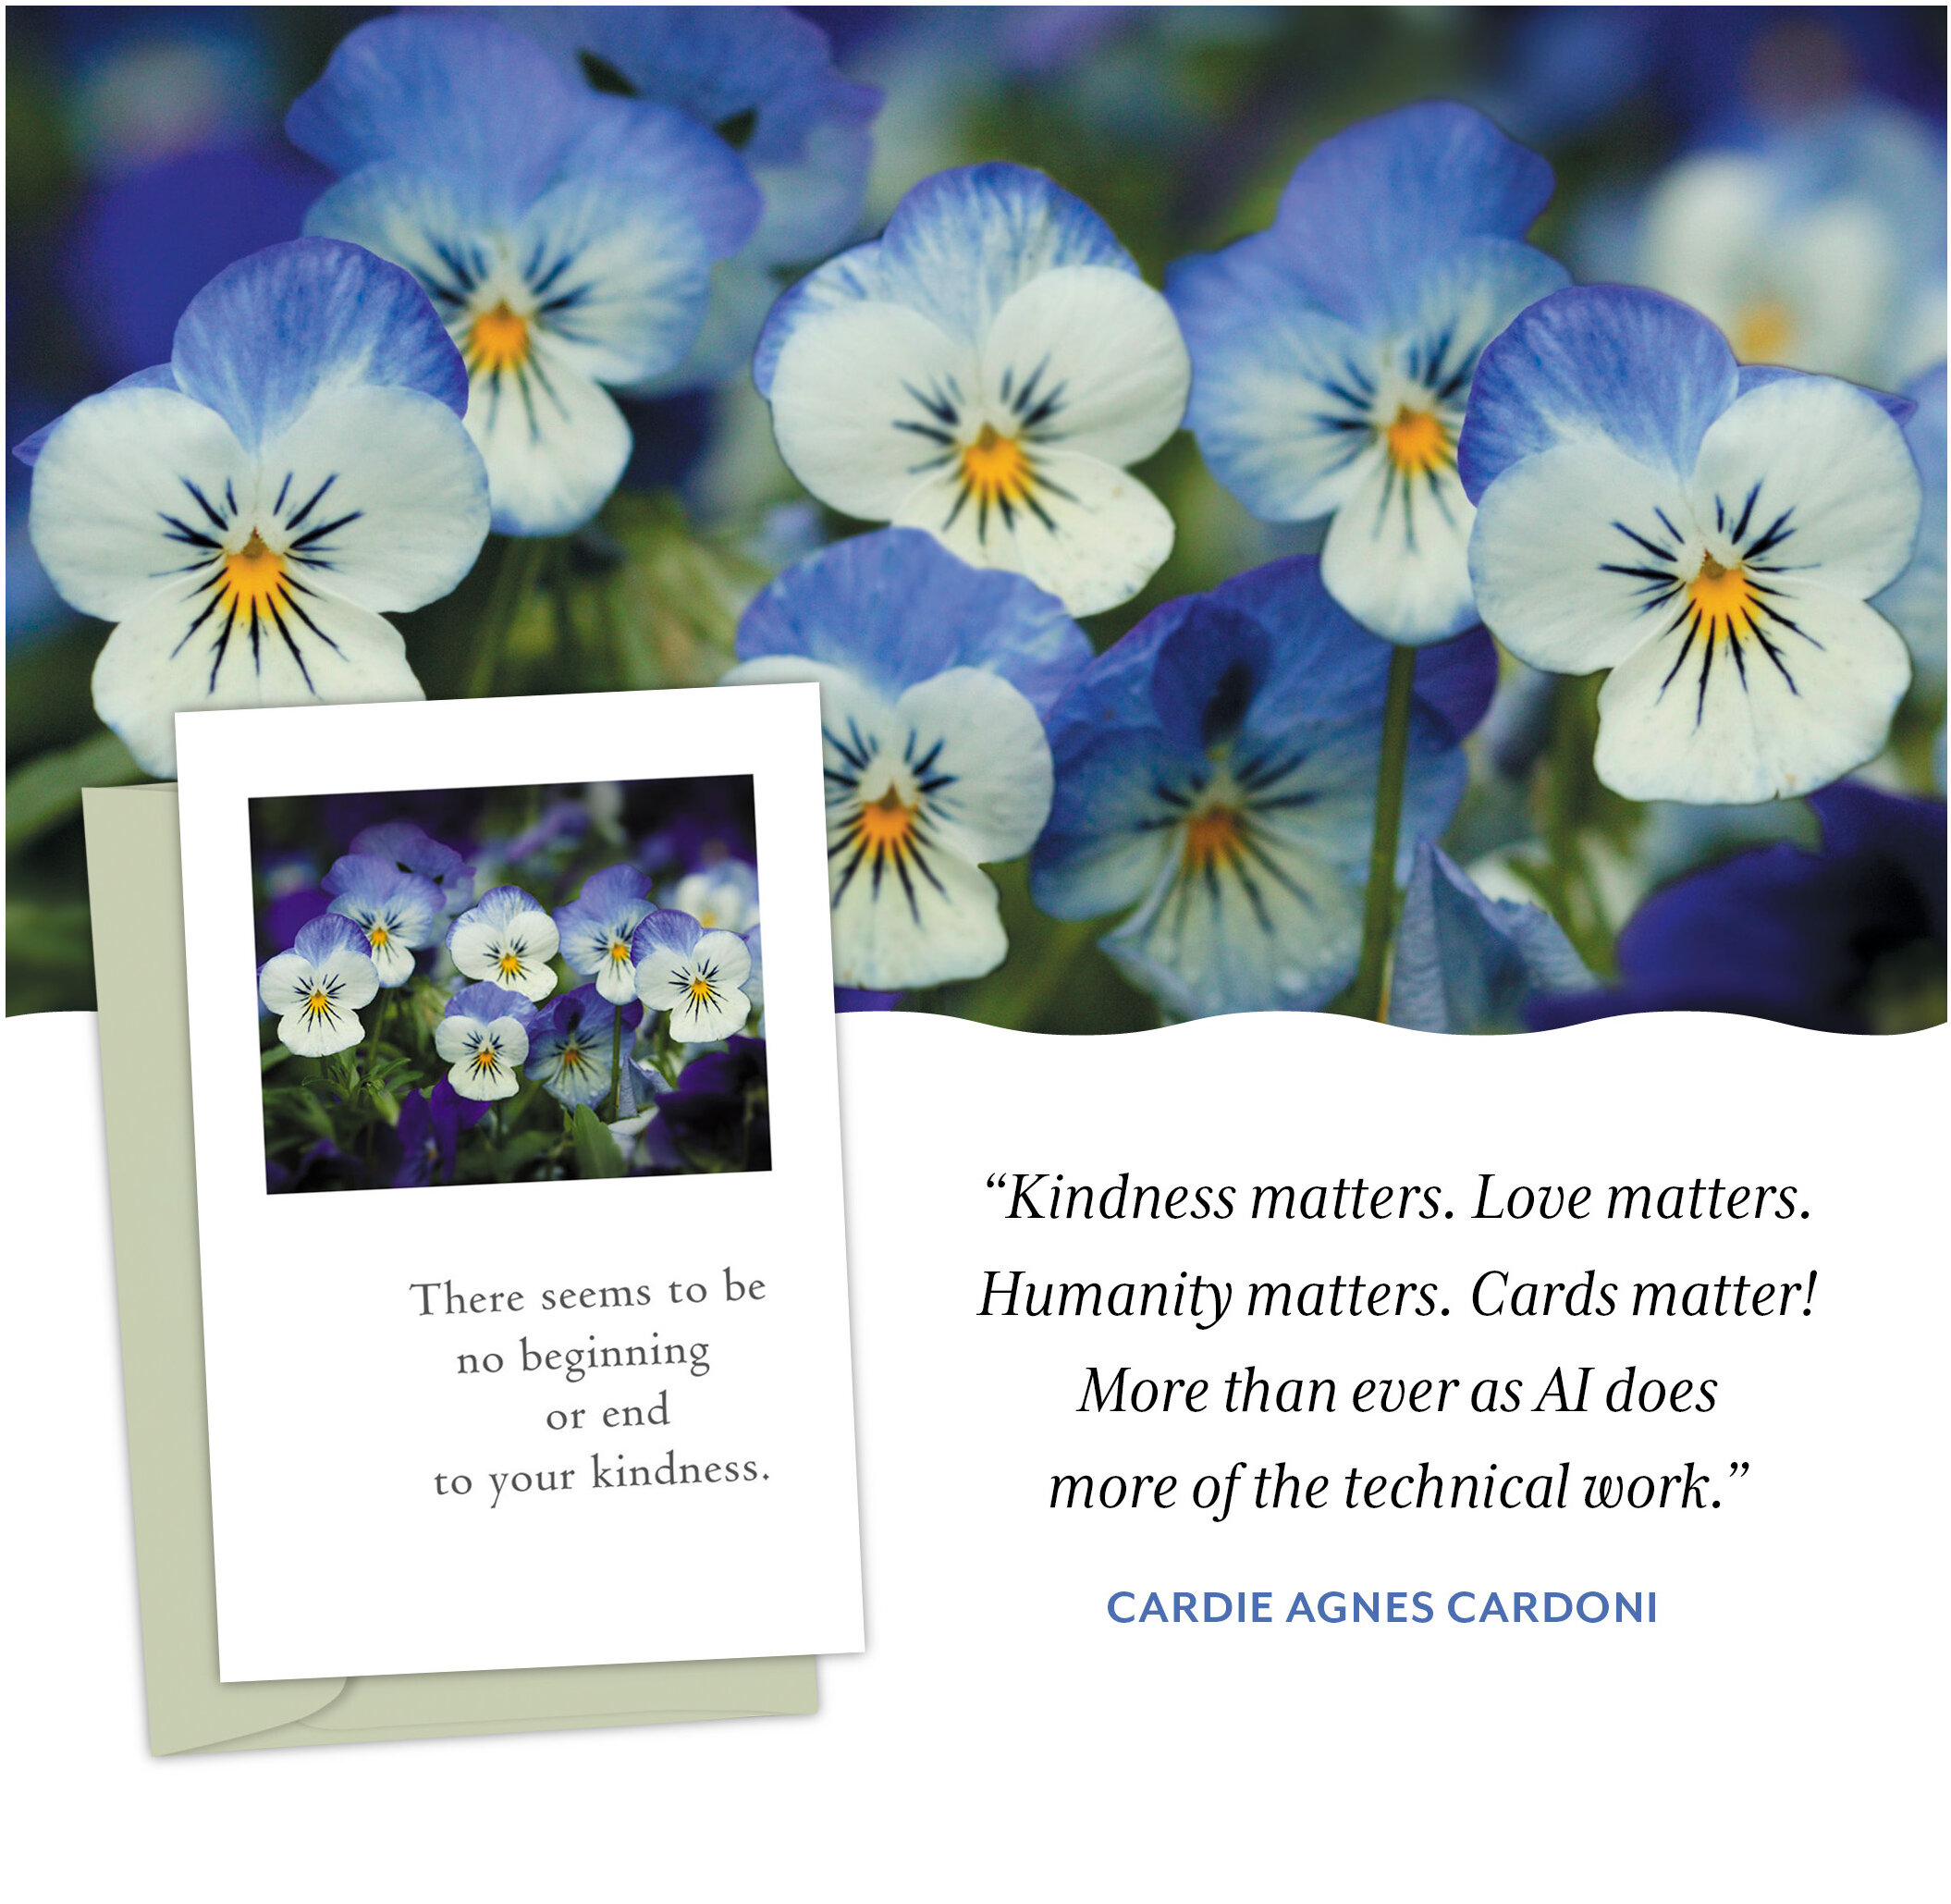 Pansies thank you card image. Kindness matters.